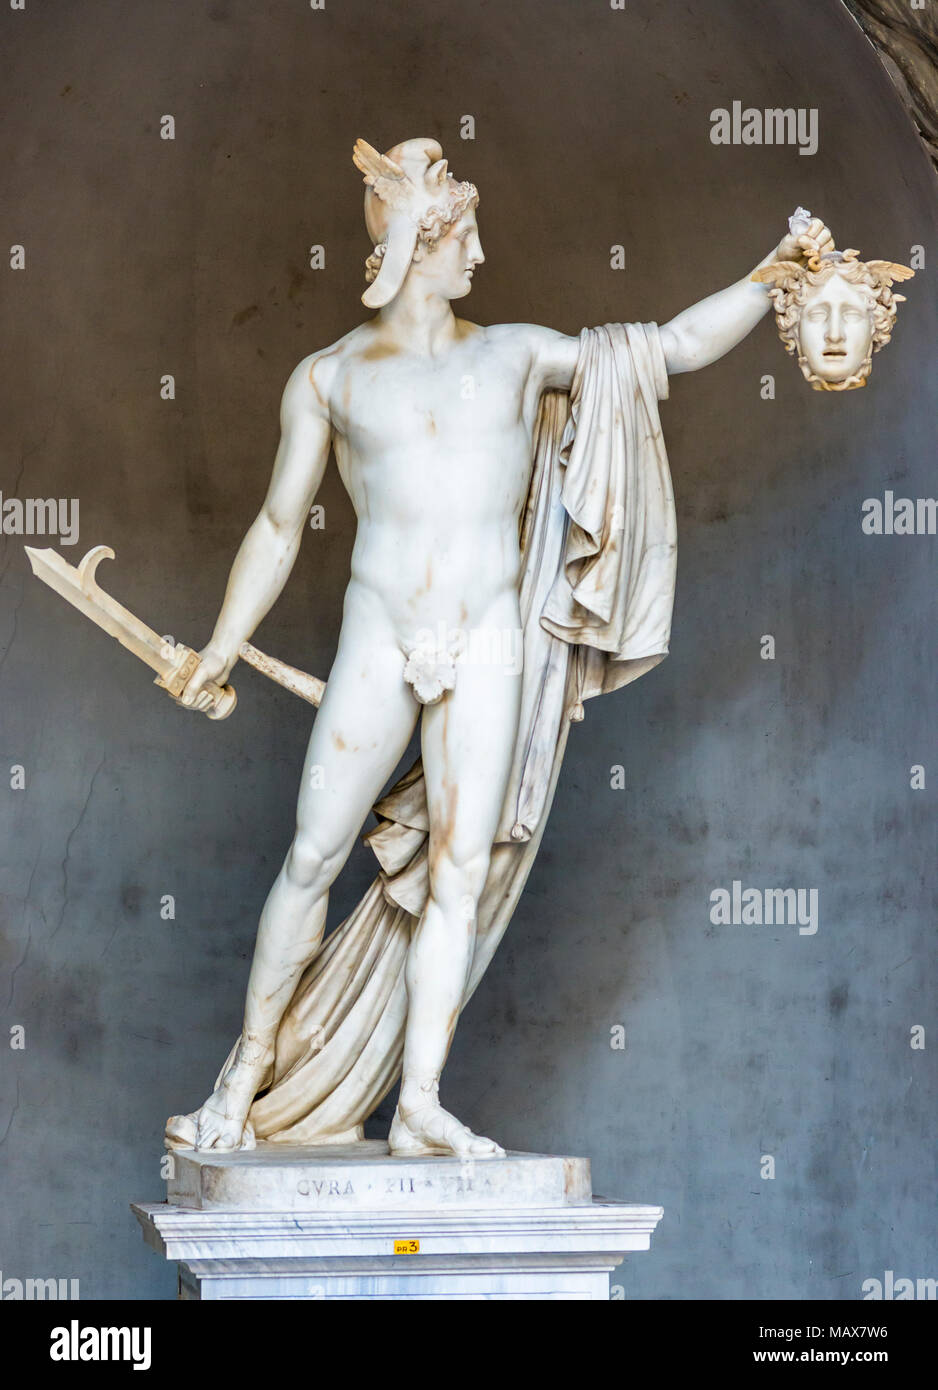 Statue of Perseus with the head of Medusa by Antonio Canova, ca. 1800. Octagonal Courtyard, Vatican Museums, Rome, Lazio, Italy. Stock Photo